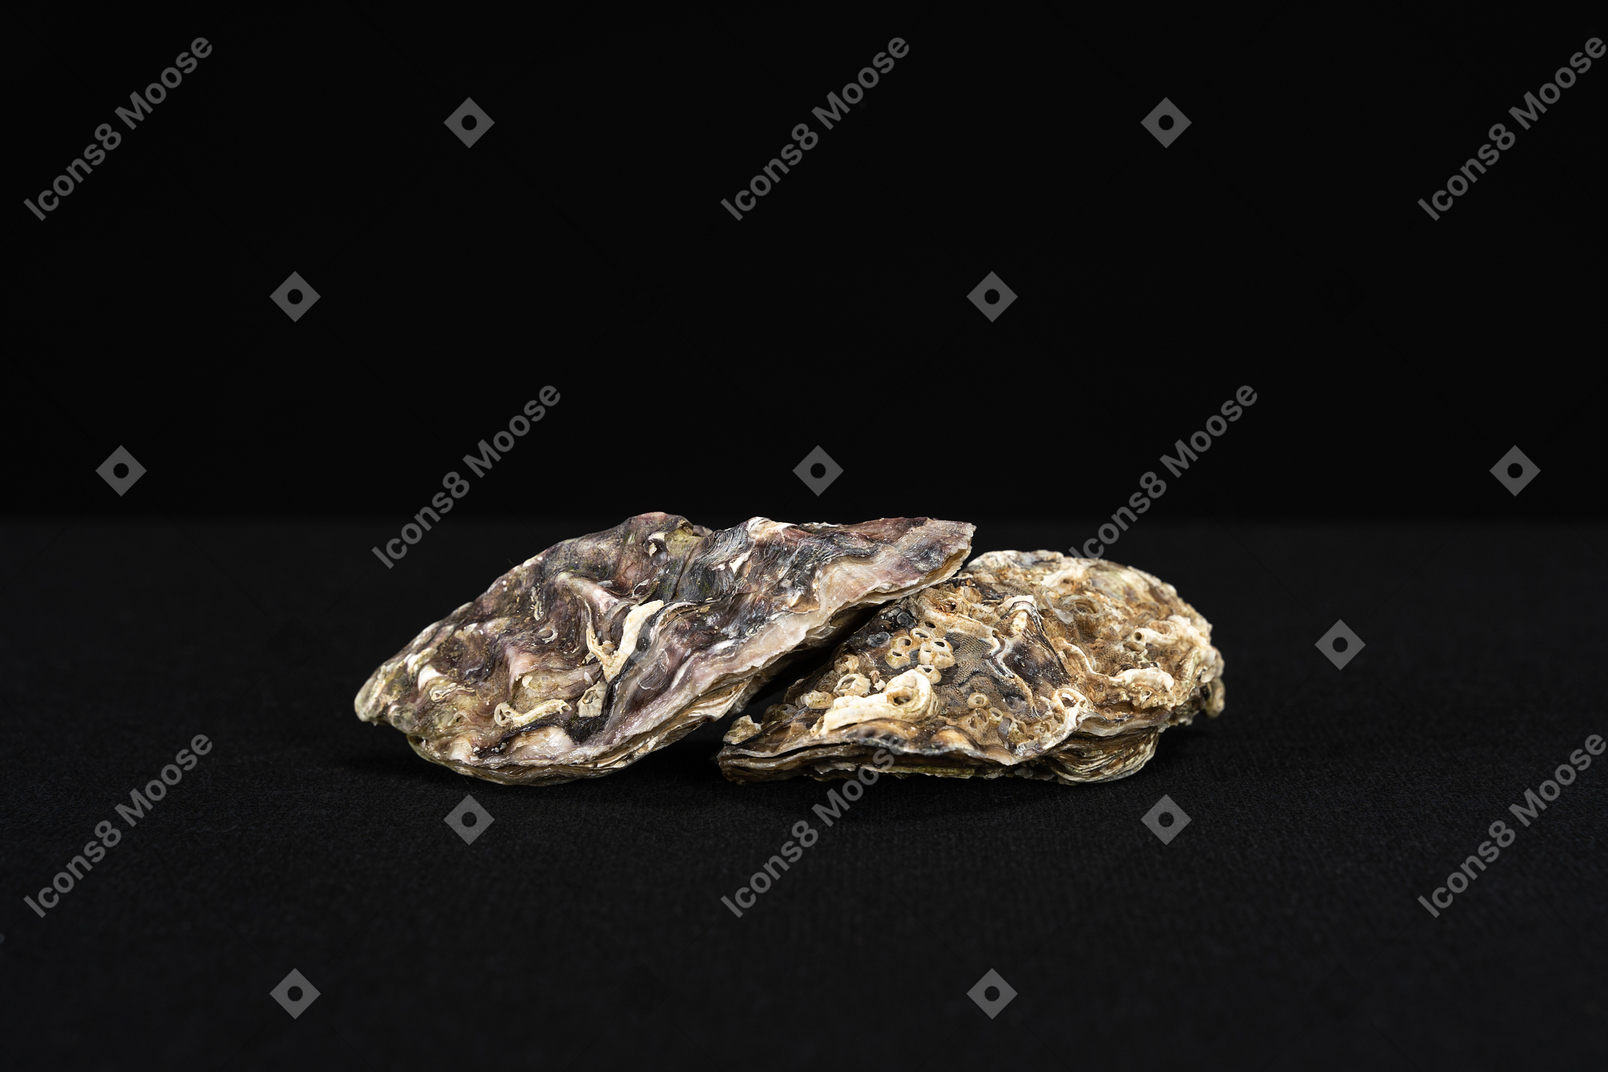 Closed oysters lying on top of each other